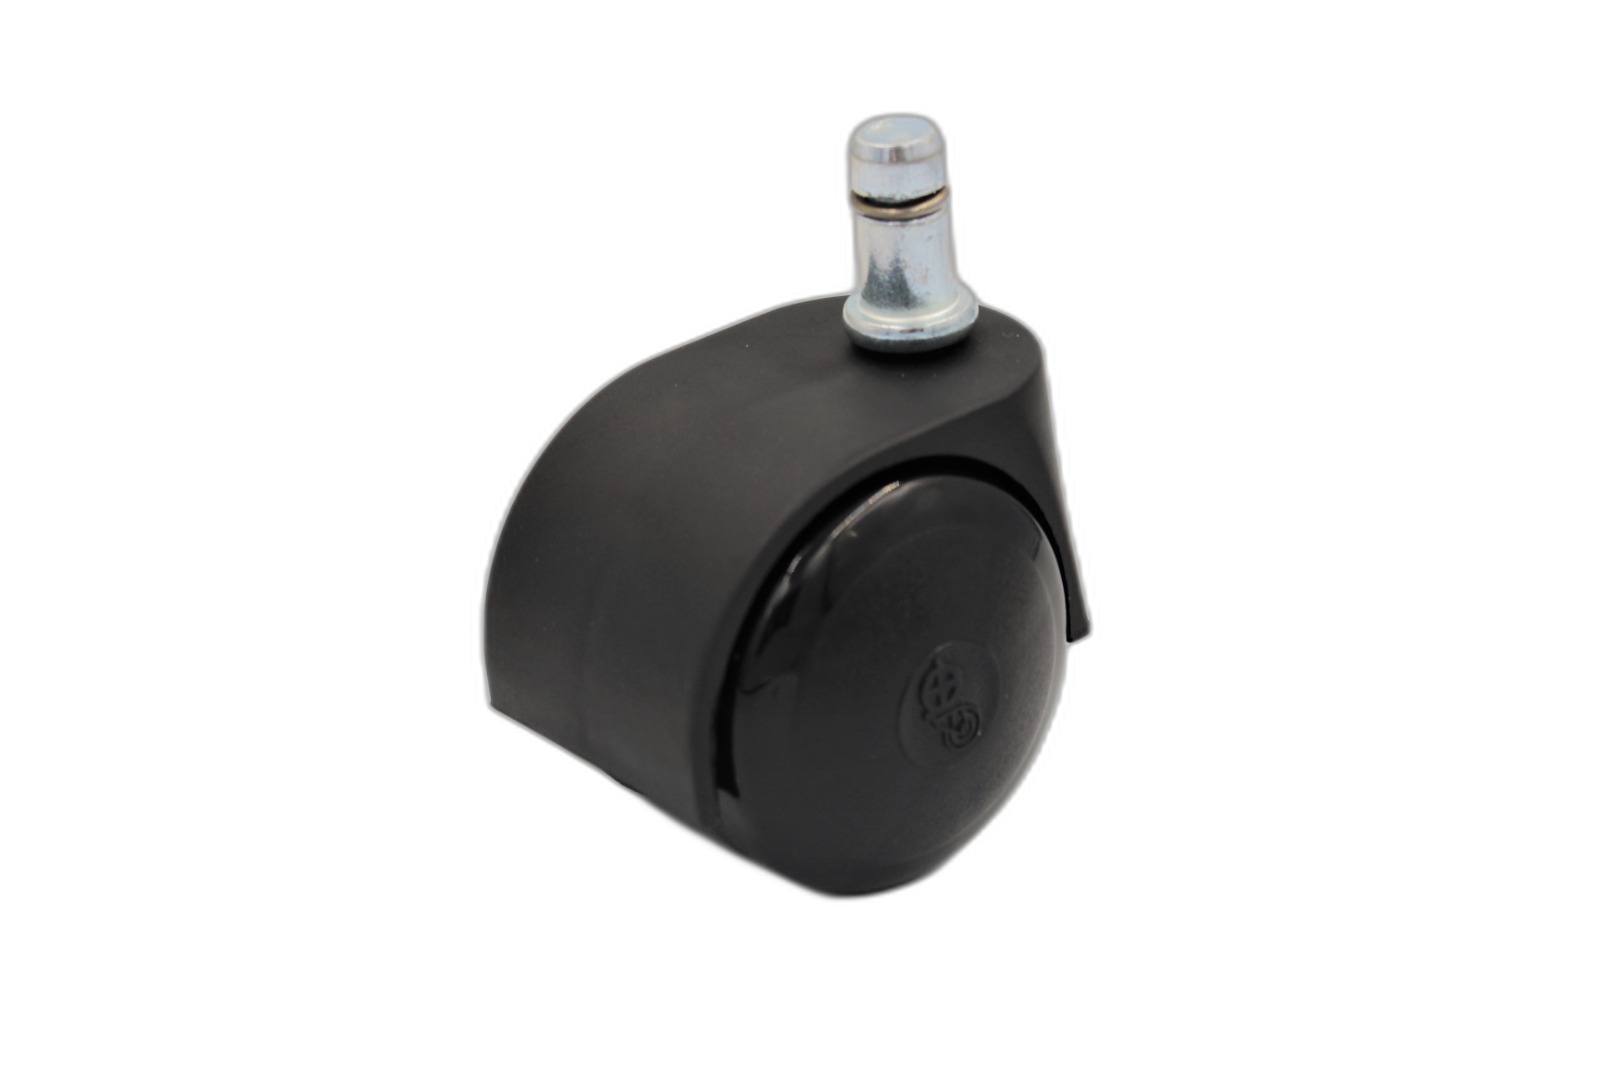 HTS Caster | N6 Buro Type Pin Furniture Caster